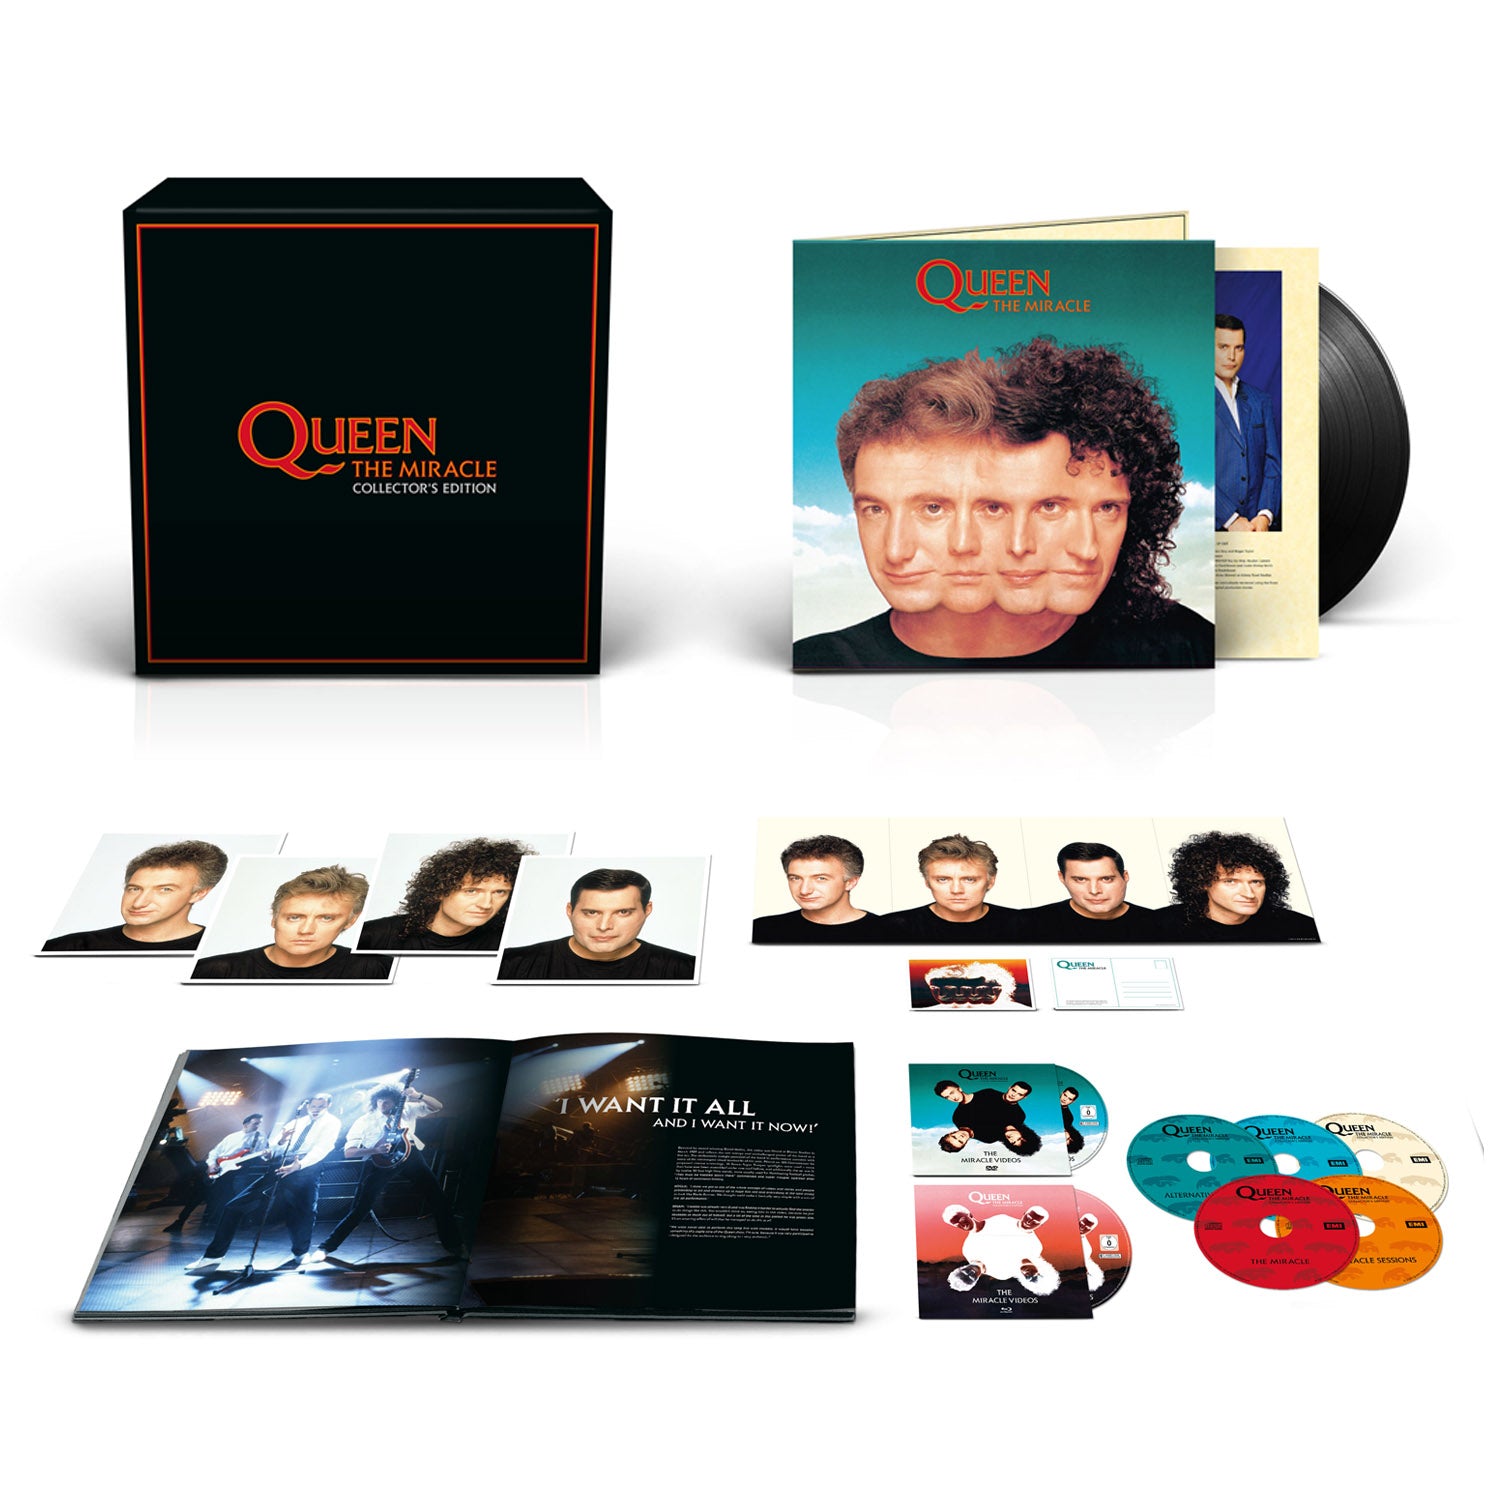 Queen - ‘The Miracle’ Super Deluxe Collector’s Edition (8 Disc)